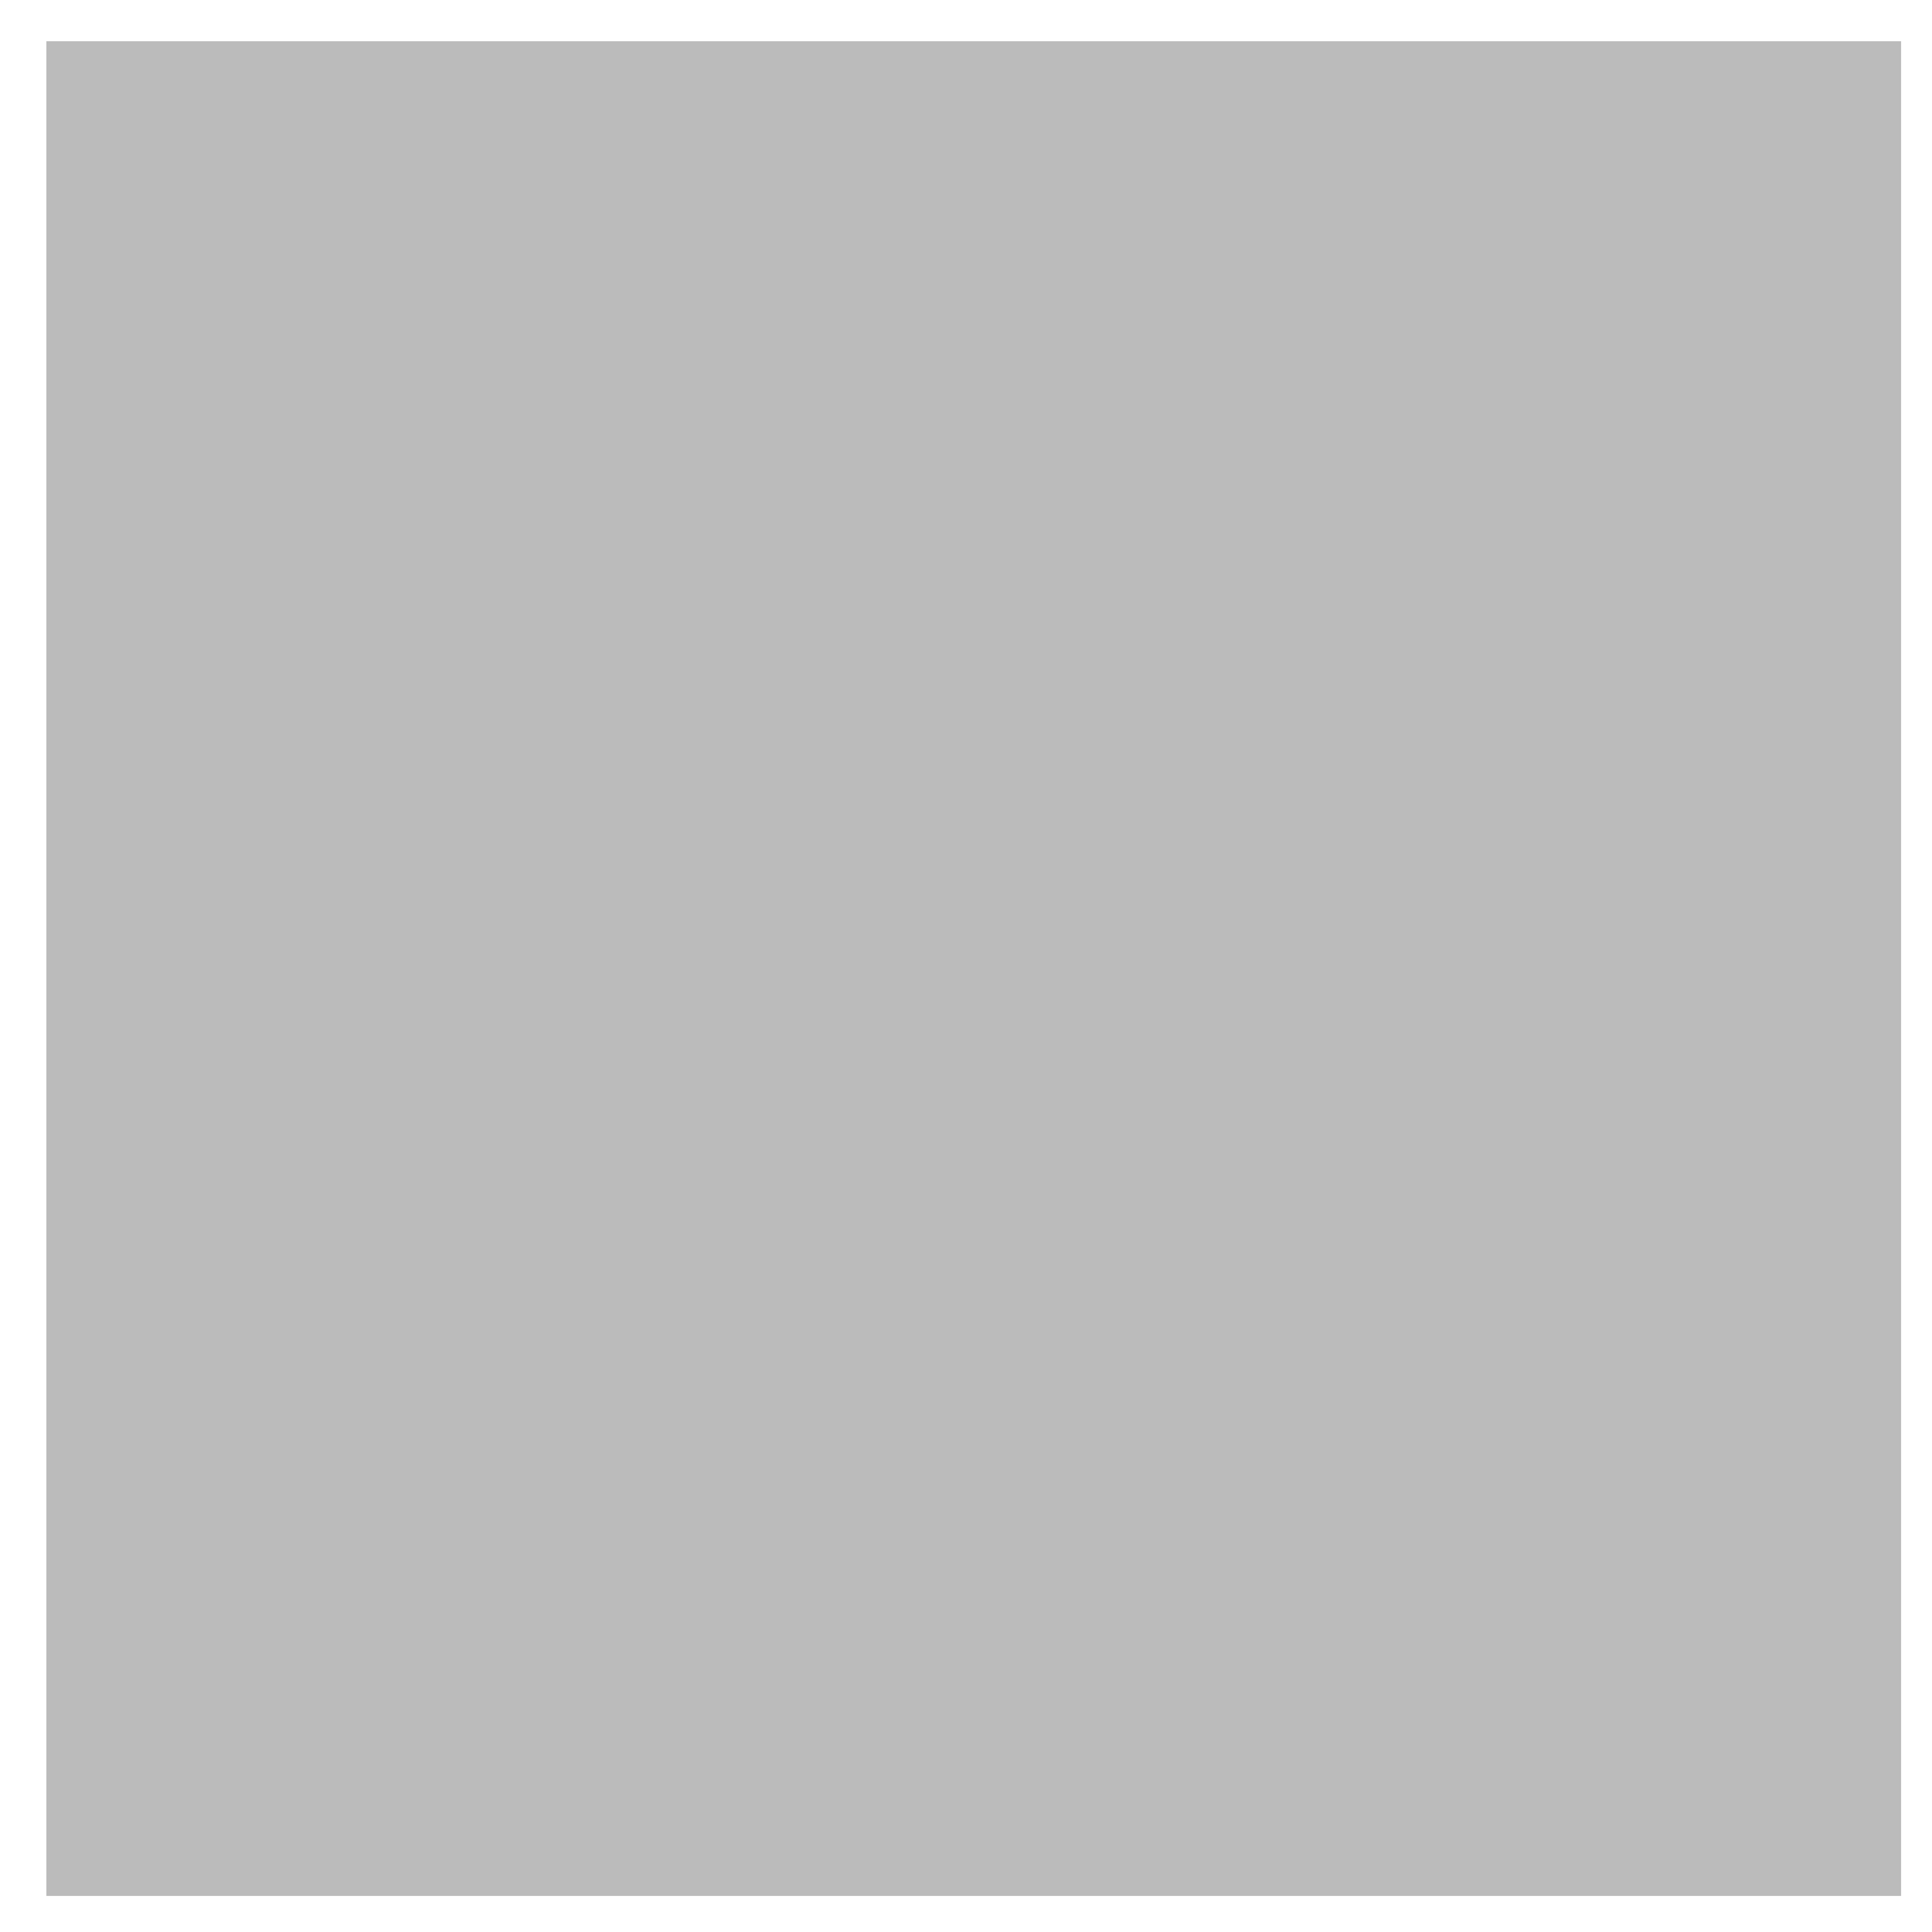 Square PNG